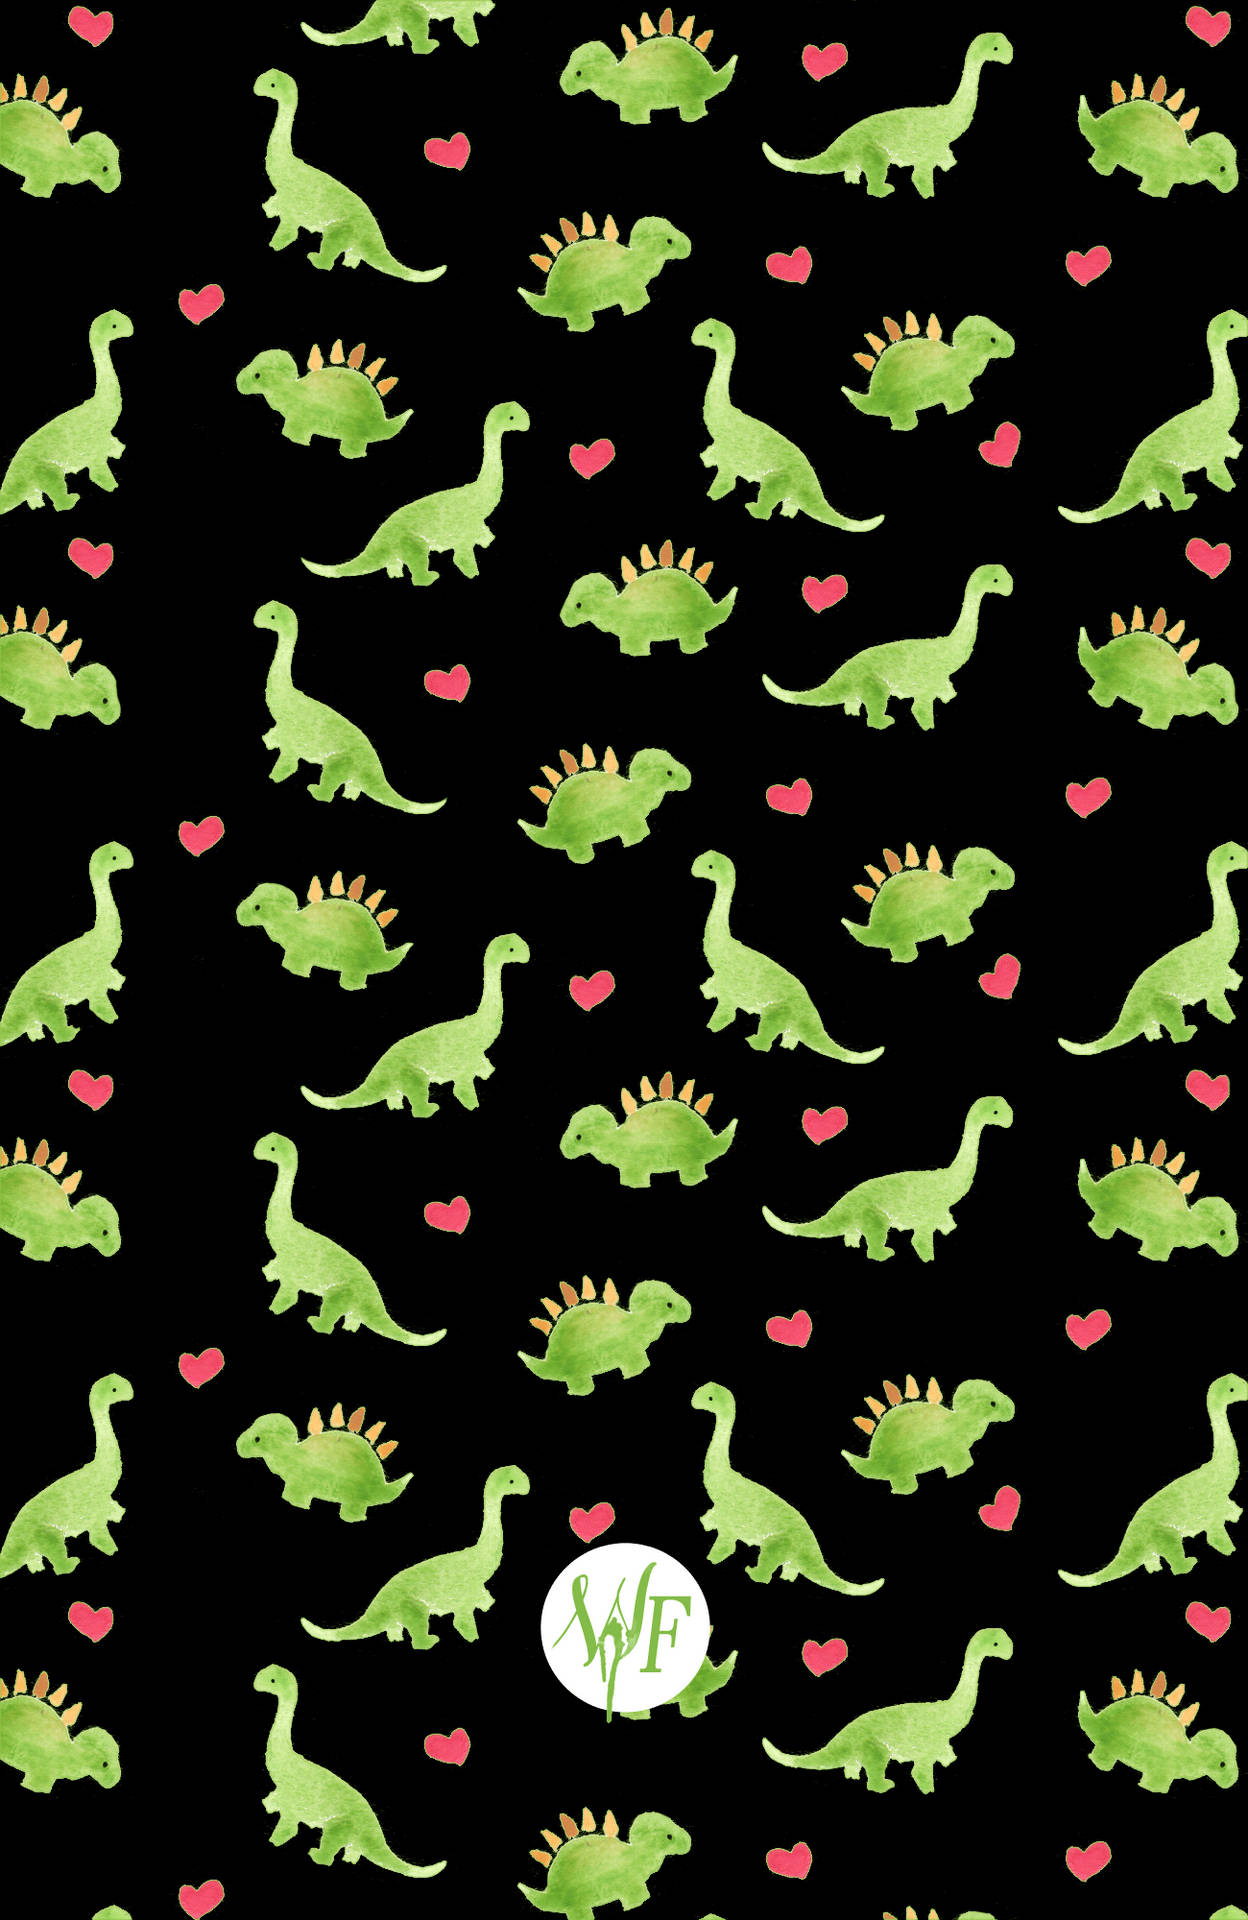 Keep your memories safe with this adorable Cute Dinosaur Iphone Wallpaper